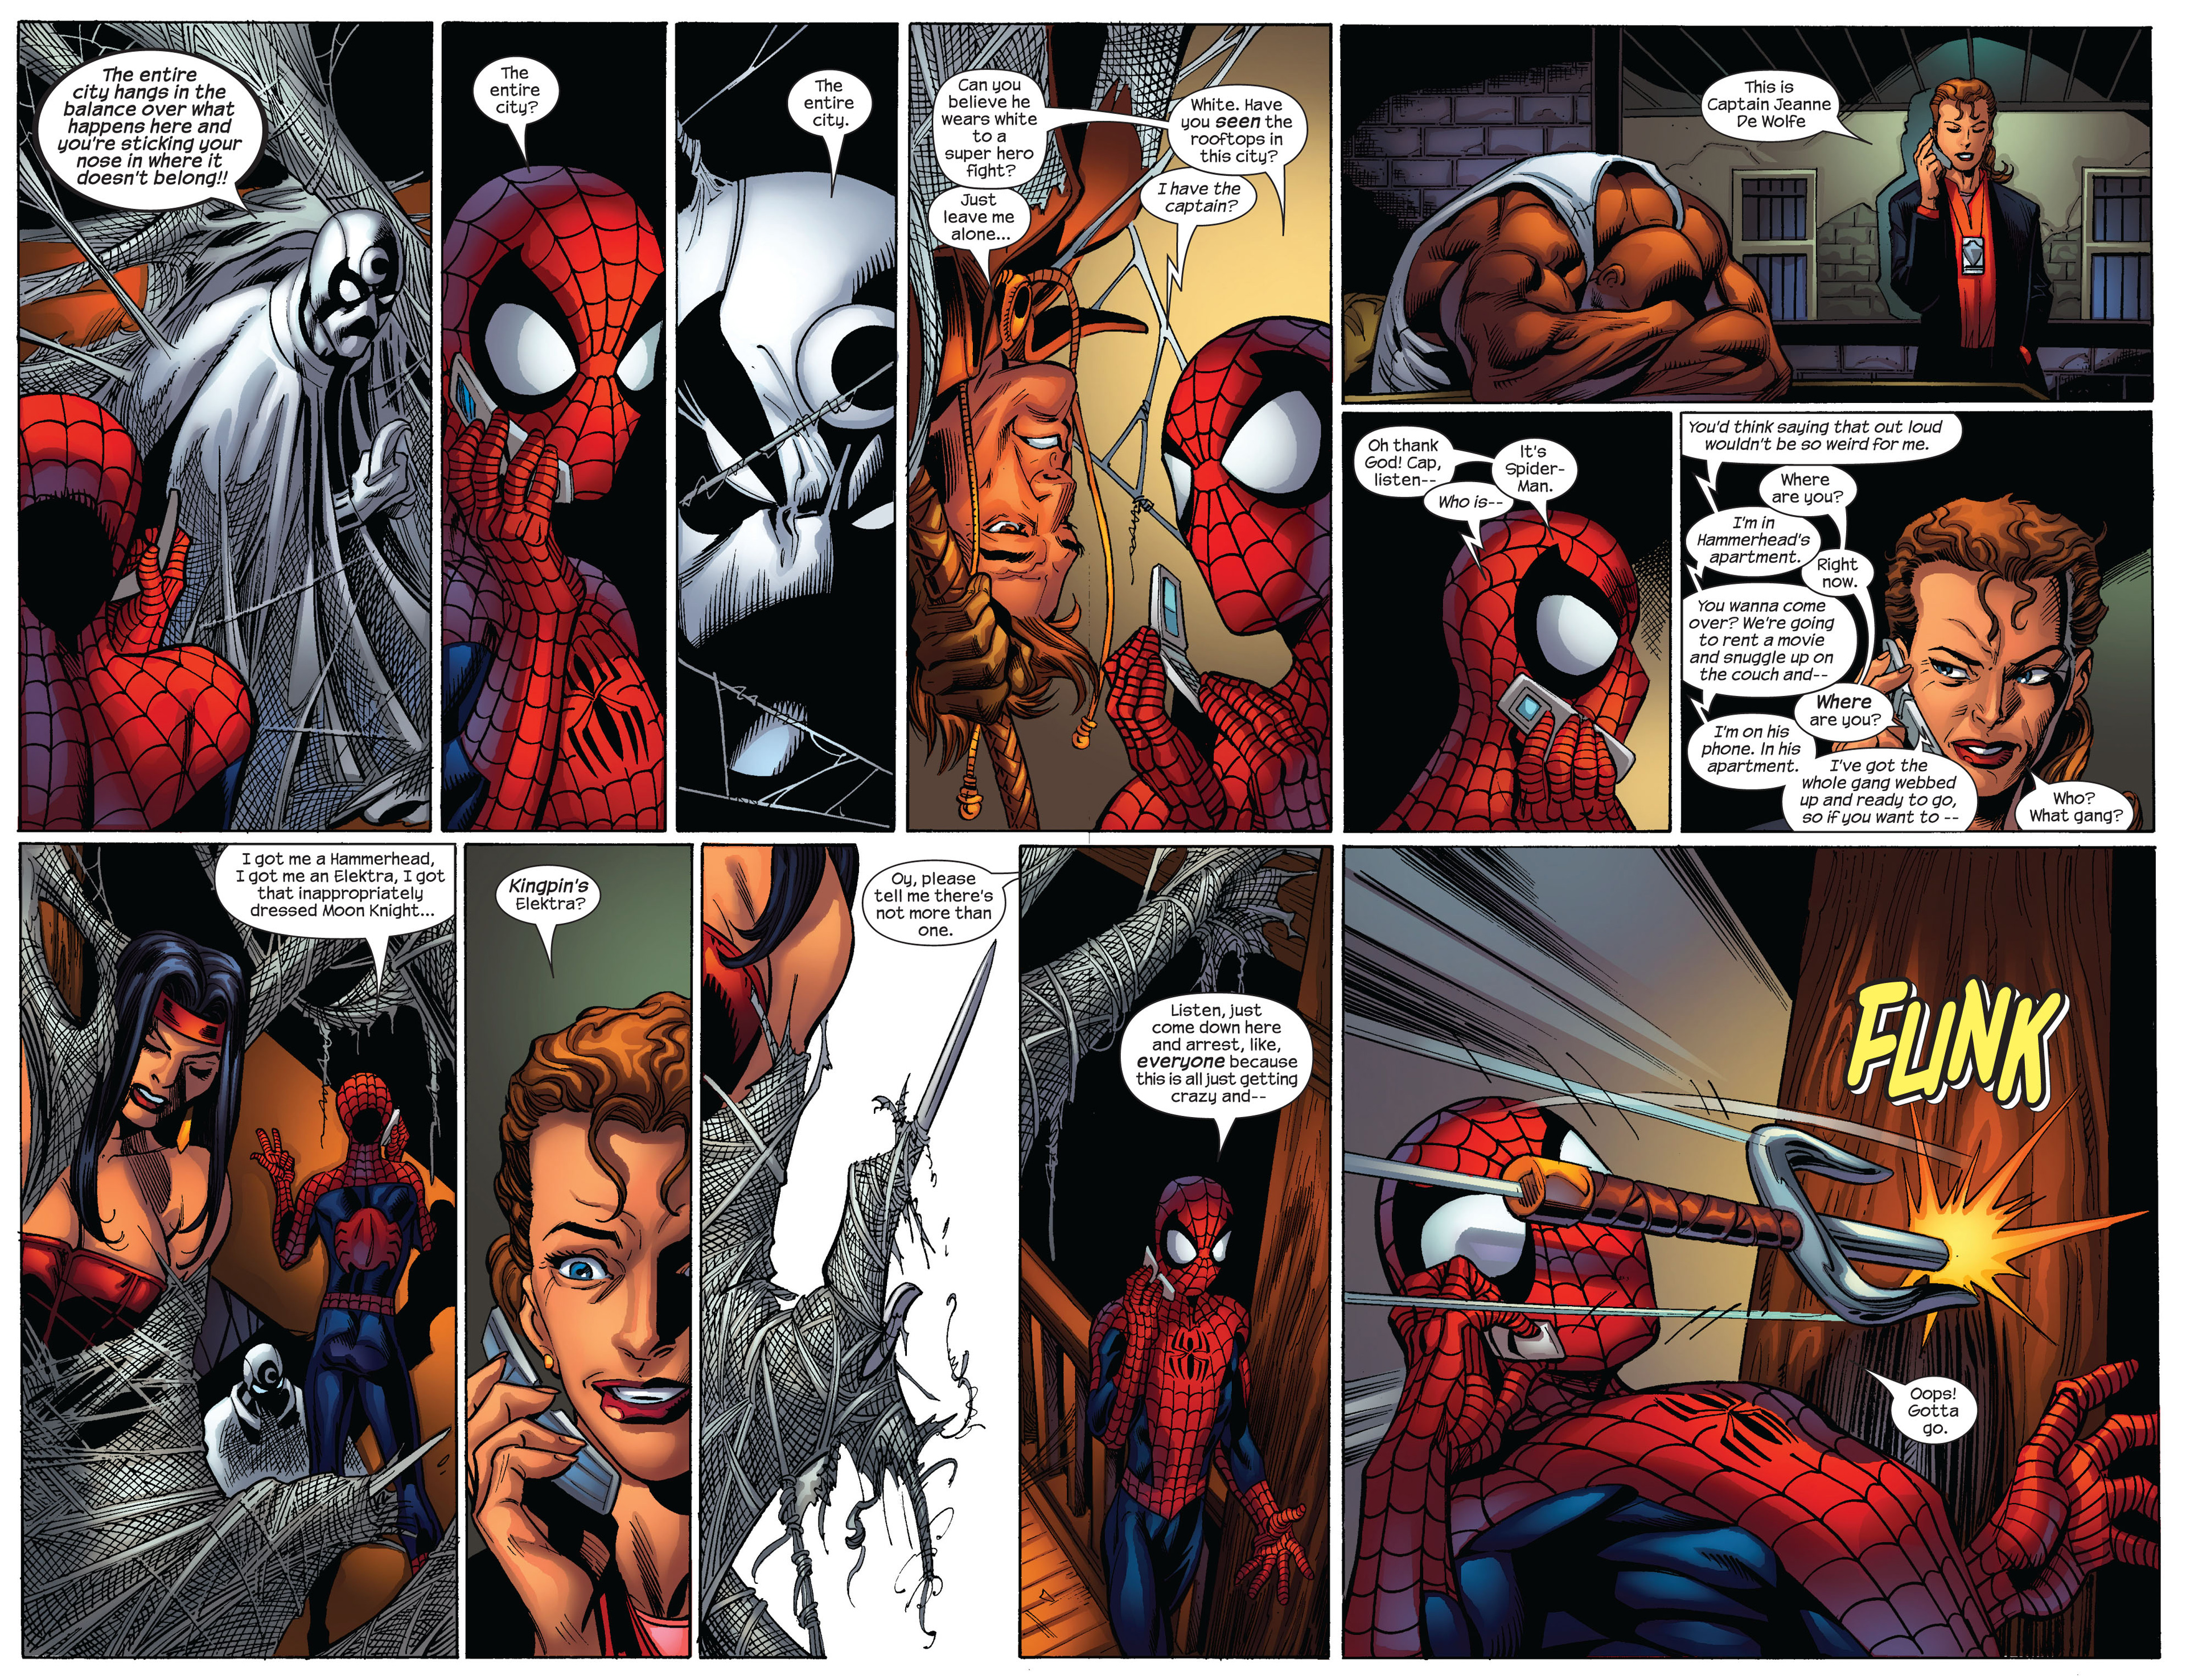 Everyone in the ultimate universe are dicks except for spider-man